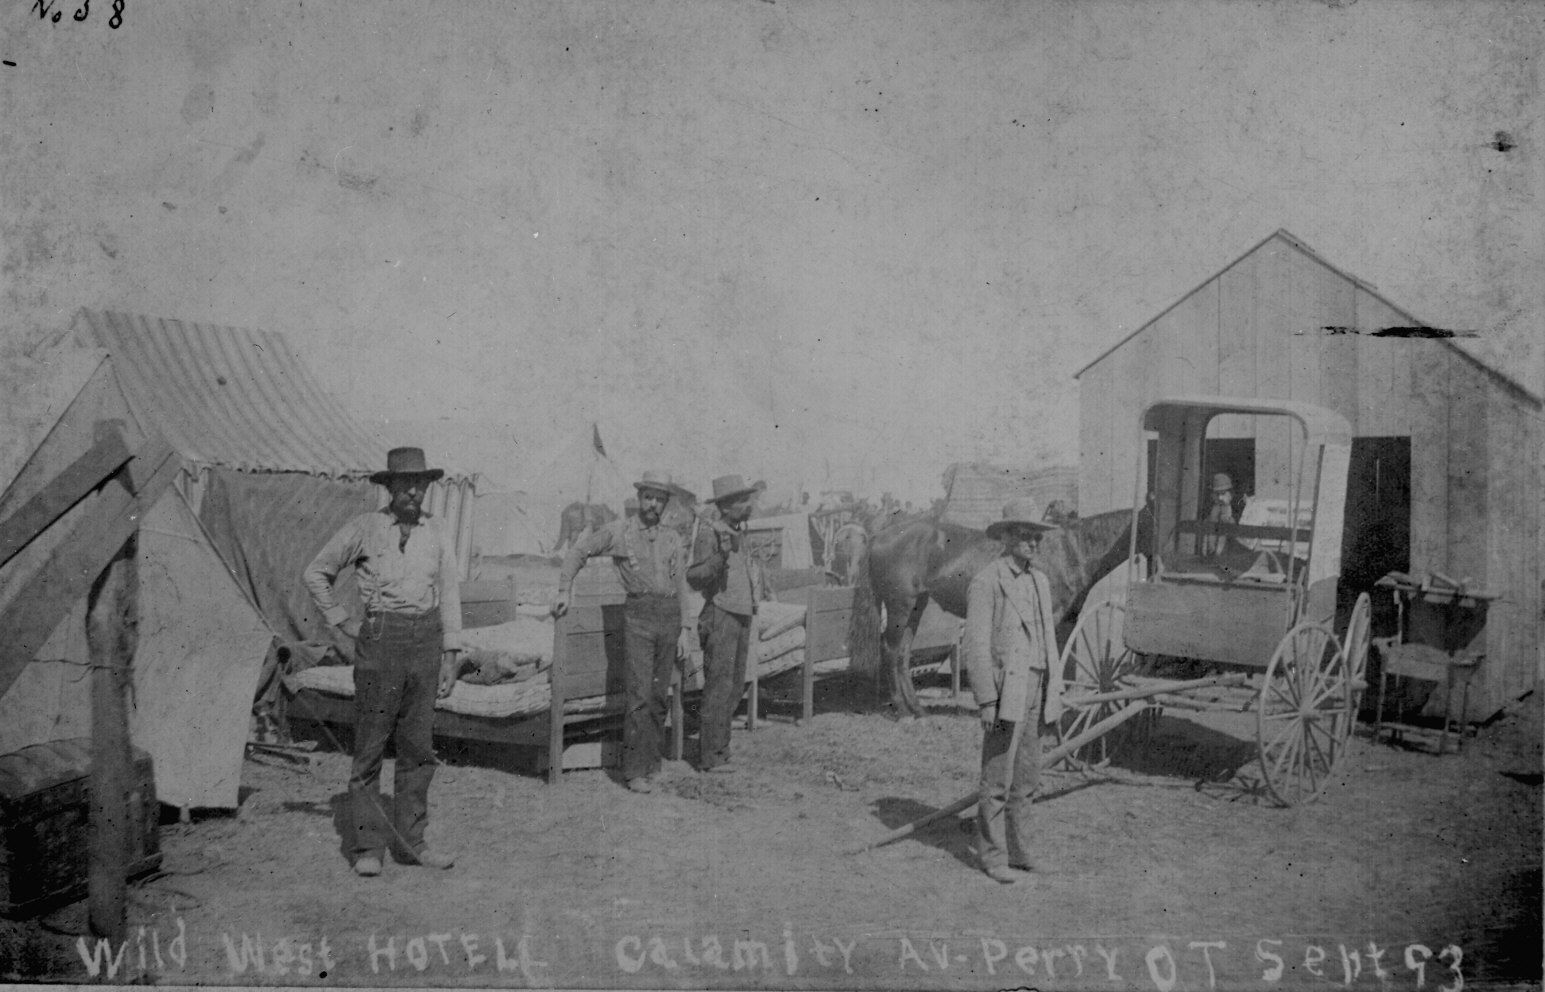 A lawless time of discover More early photos from the Old West image 9